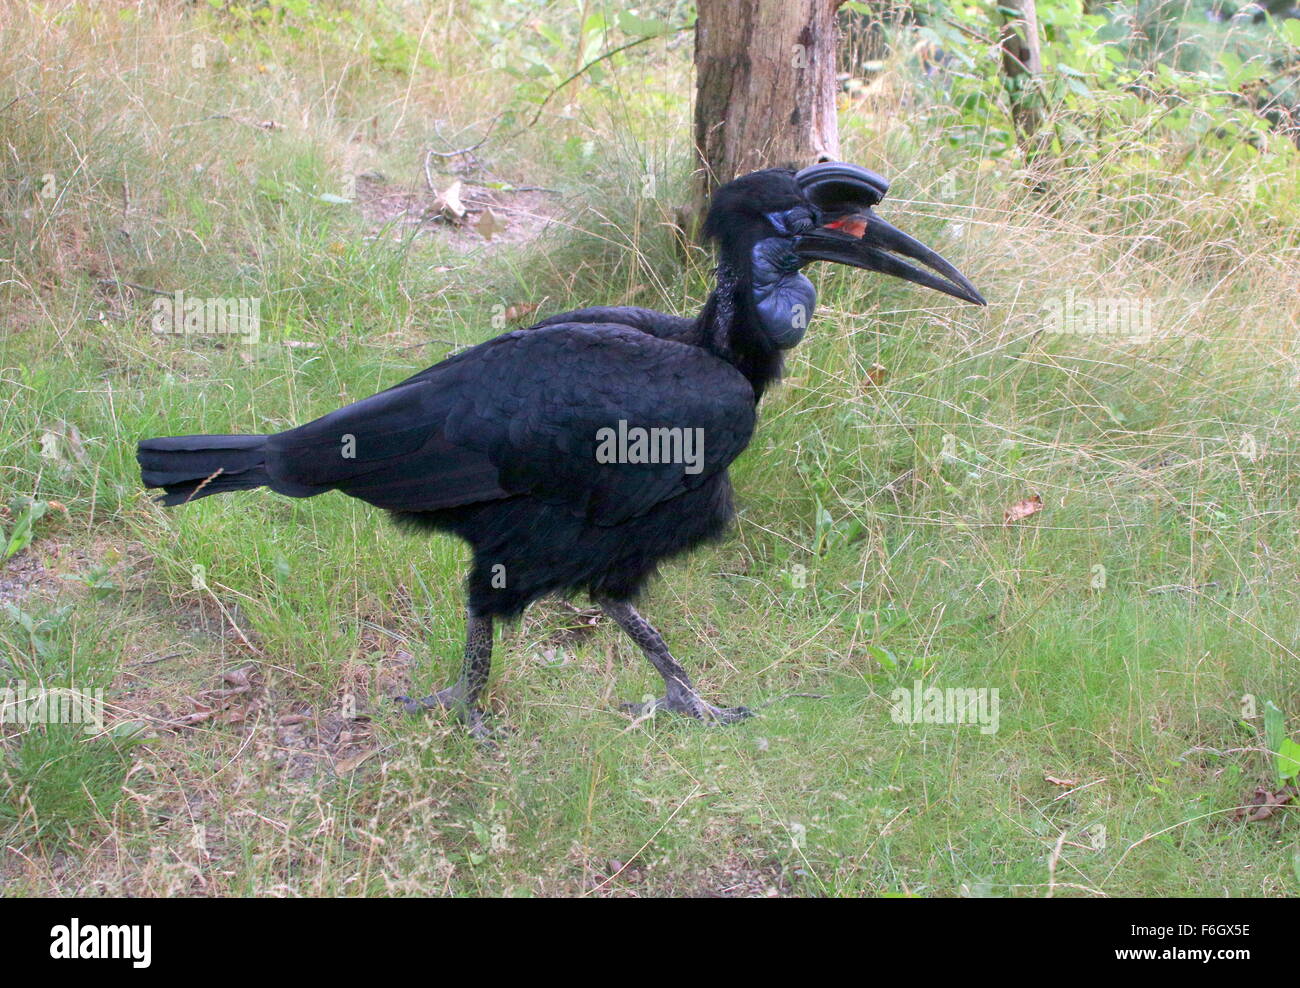 Female Abyssinian or Northern Ground hornbill (Bucorvus abyssinicus) walking in the grass Stock Photo